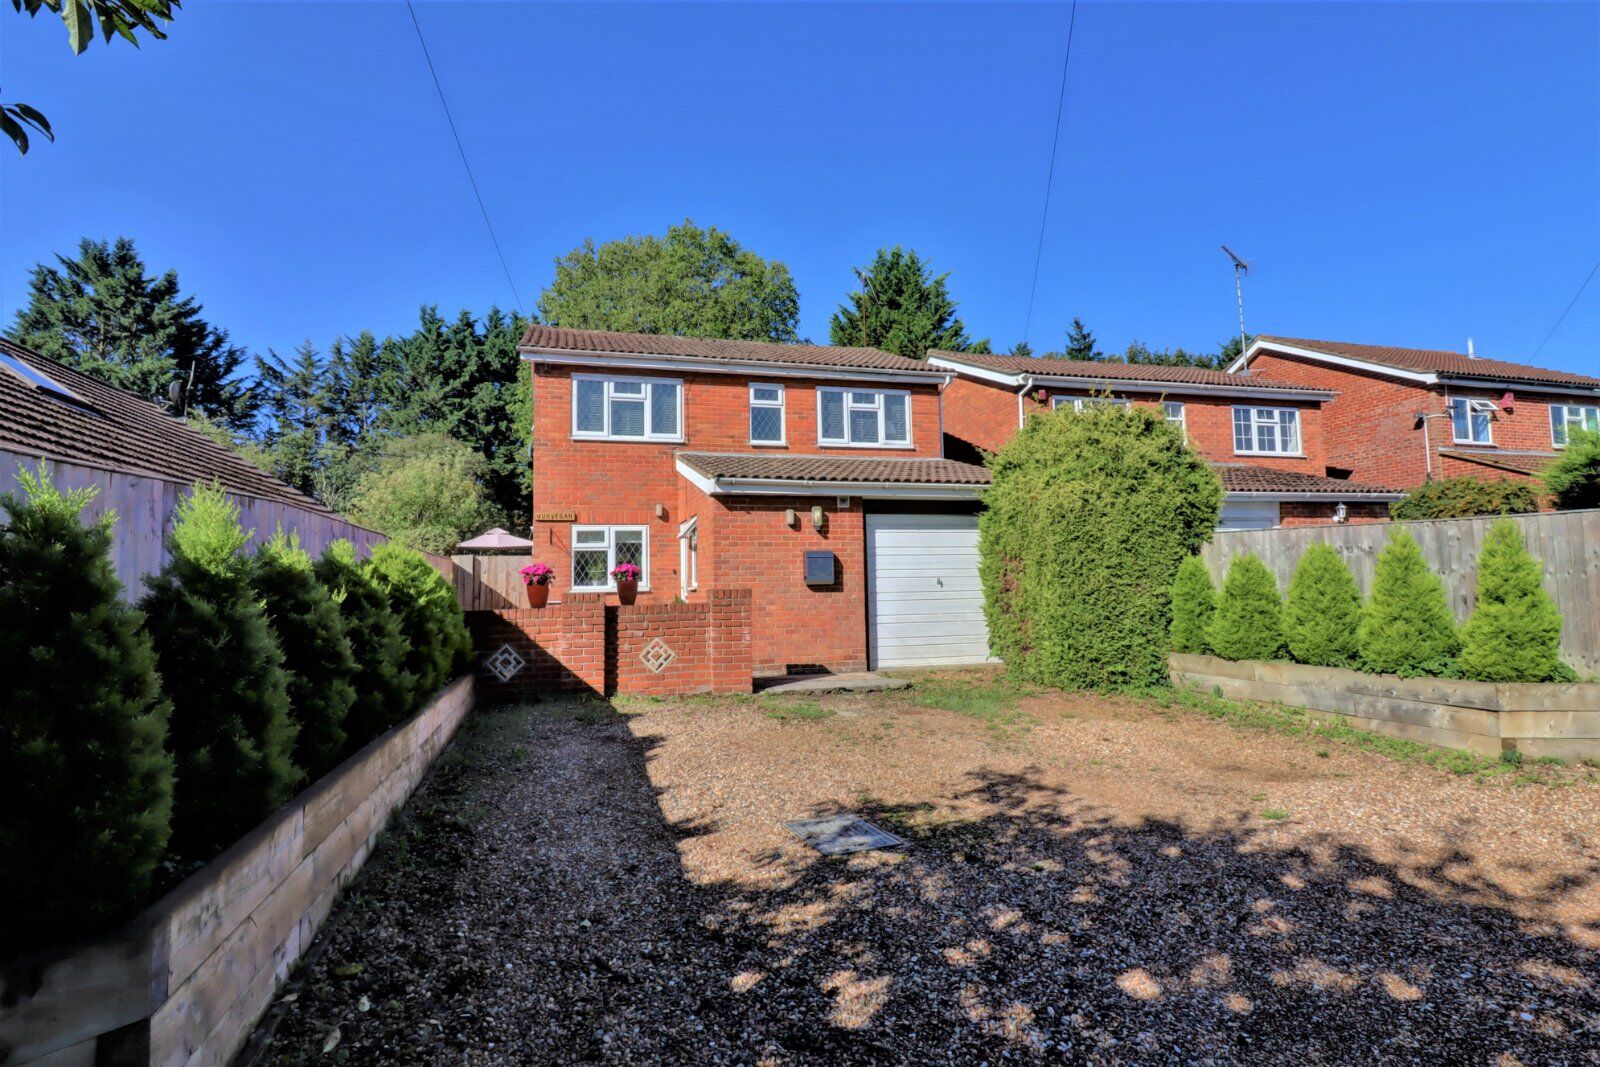 4 bedroom detached house for sale Wycombe Road, Saunderton, HP14, main image